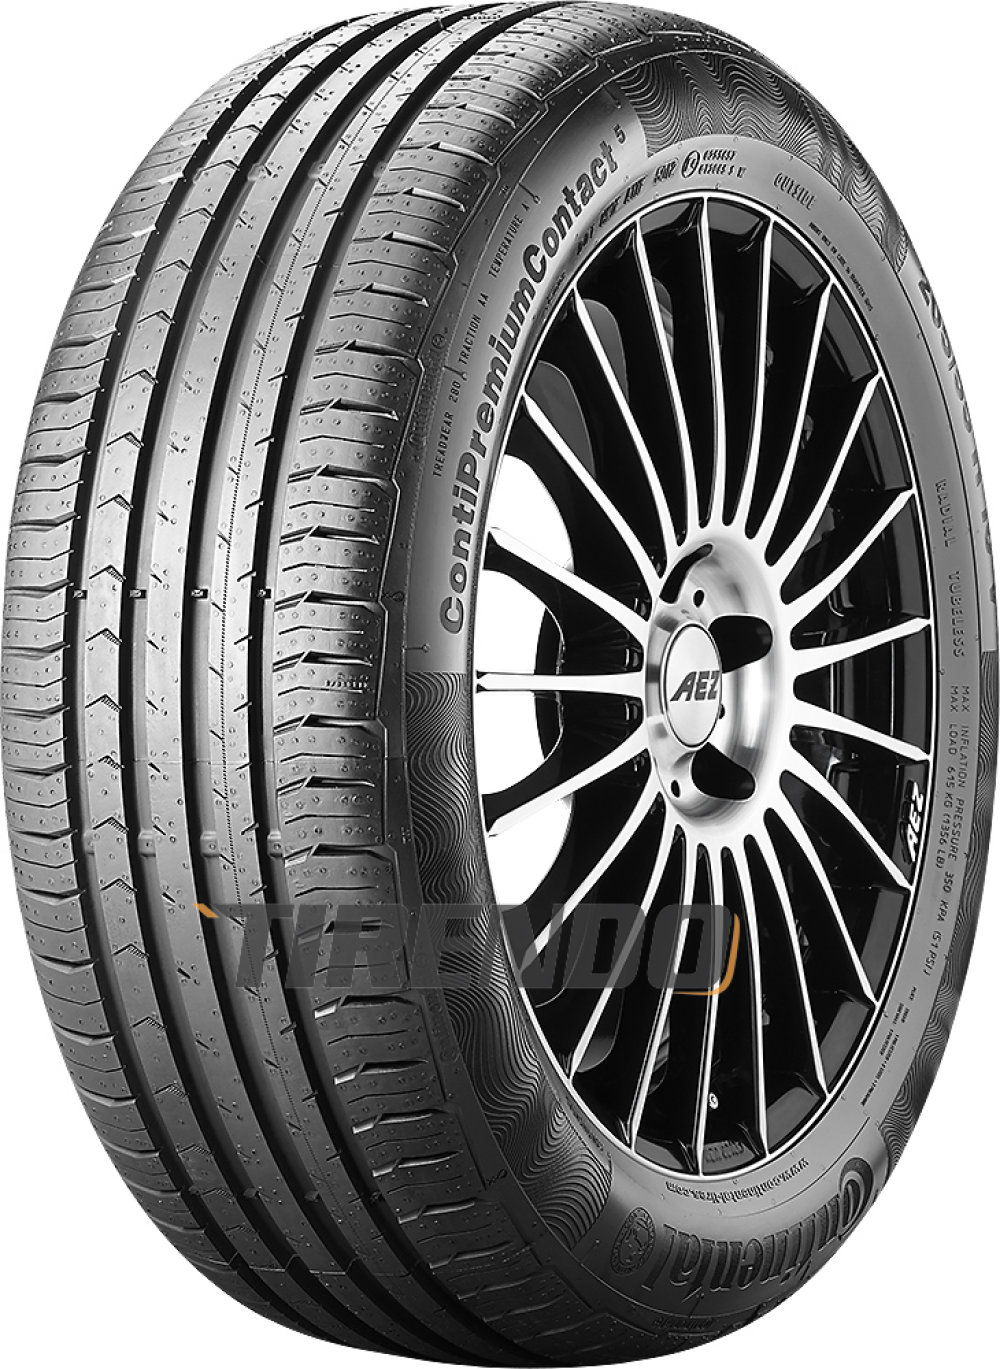 Image of Continental ContiPremiumContact 5 ( 215/60 R16 99H XL )